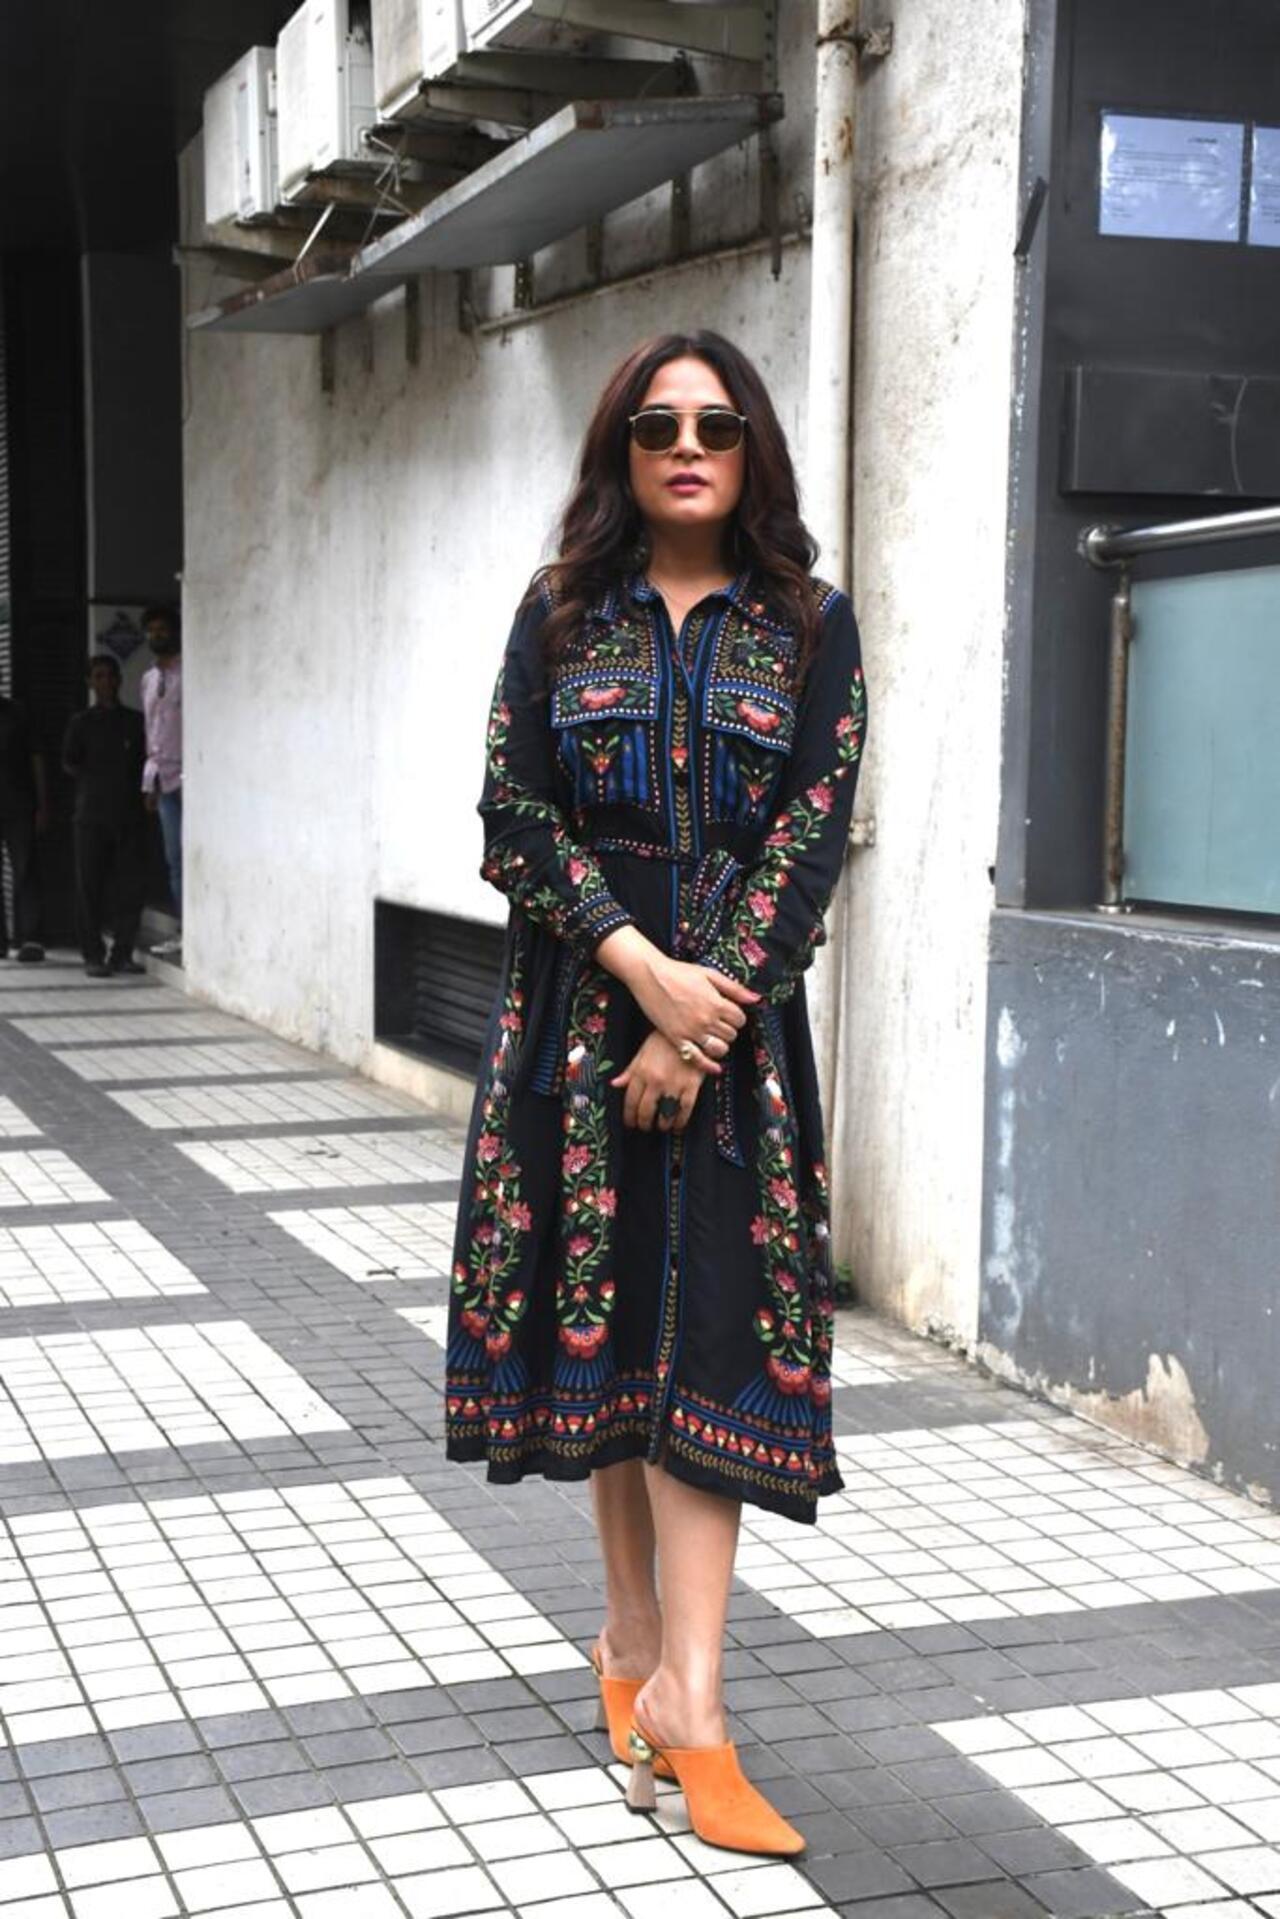 Richa Chadha, who is gearing up for the release of Fukrey 3, was seen in the city this afternoon